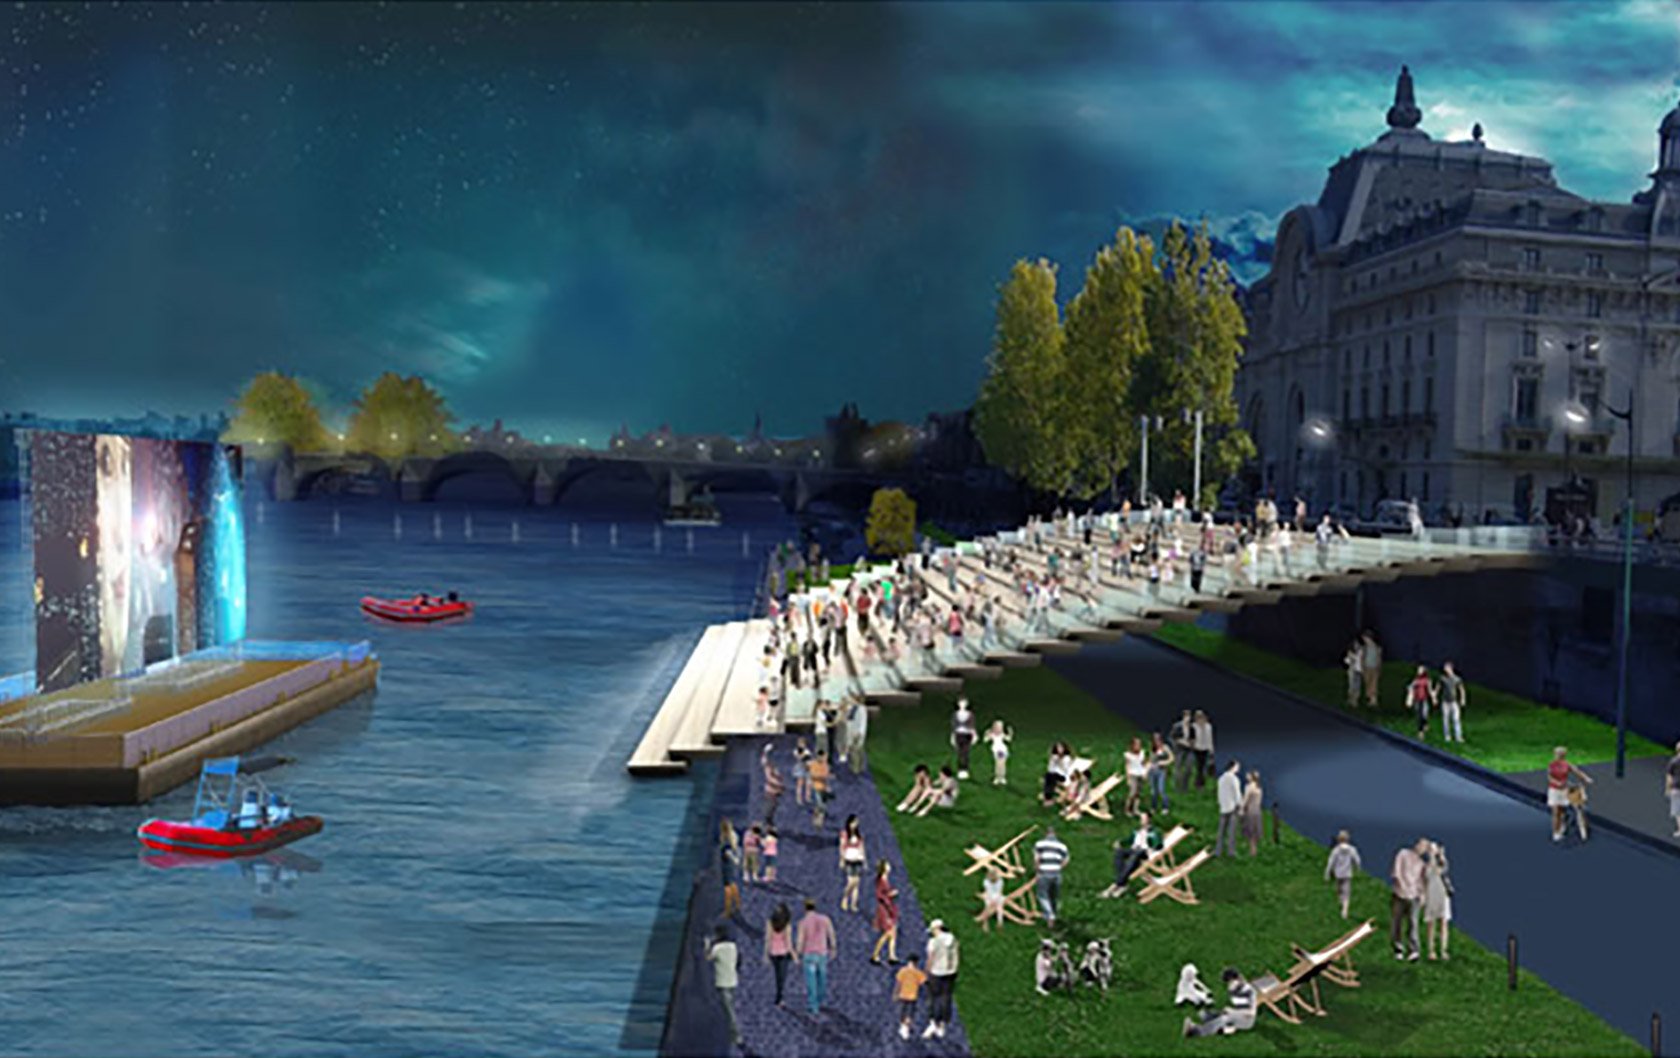 banks-of-the-seine-transformed-open-air-movies